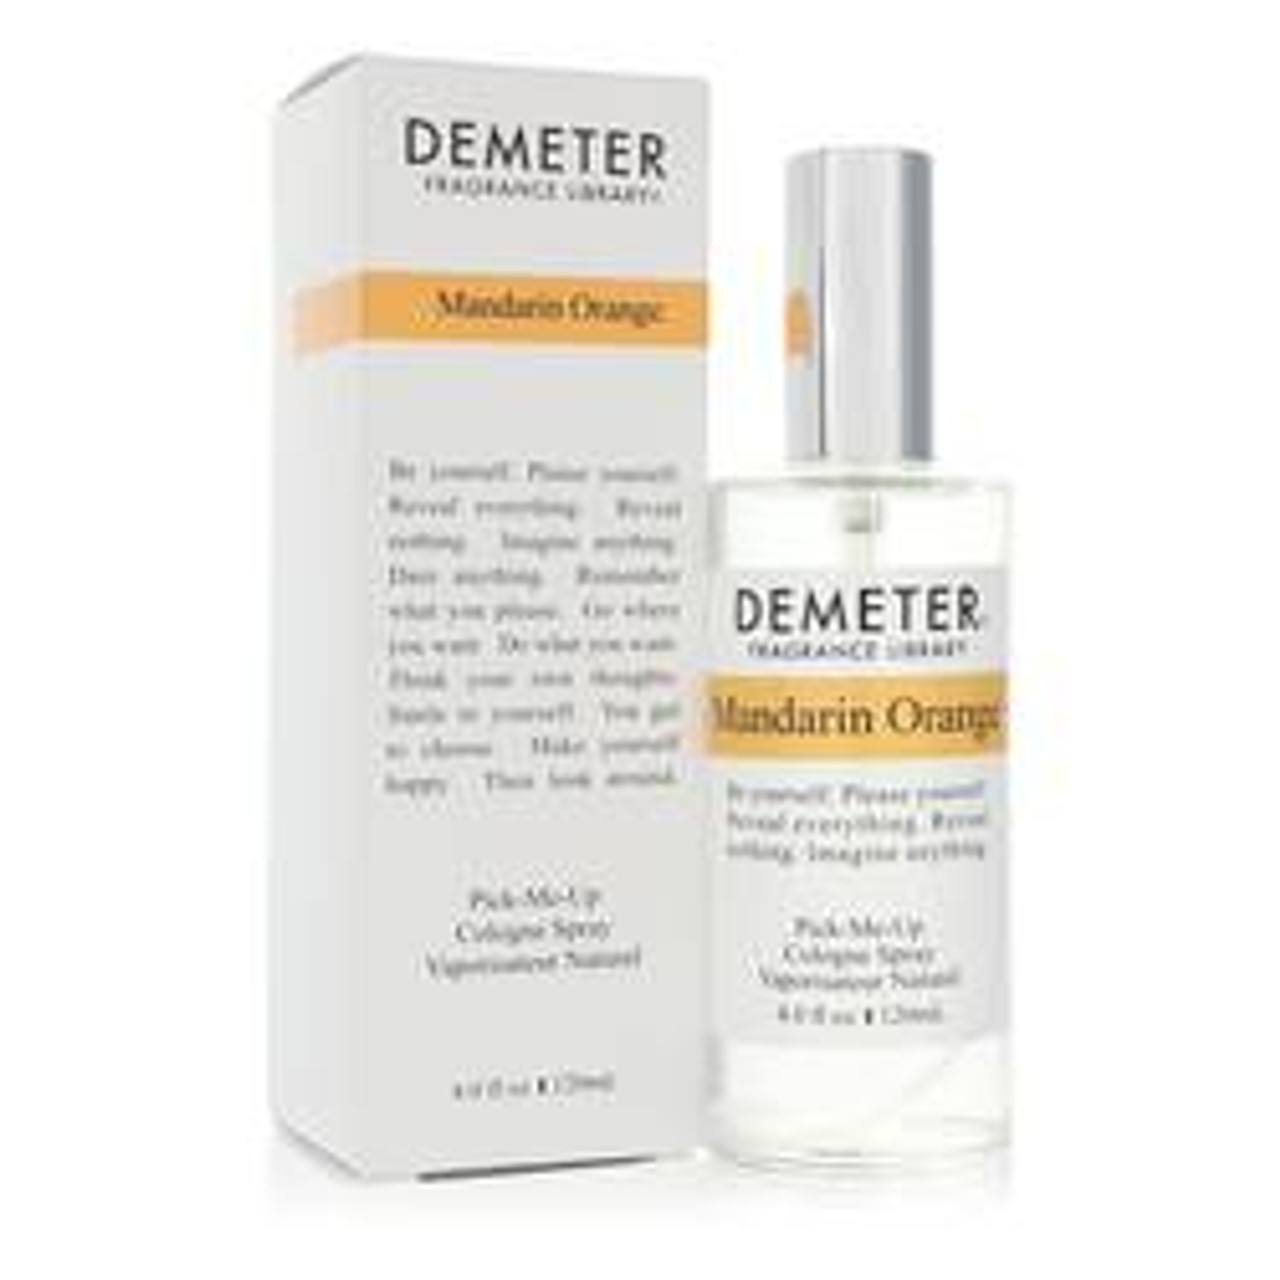 Demeter Mandarin Orange Perfume By Demeter Cologne Spray (Unisex) 4 oz for Women - [From 79.50 - Choose pk Qty ] - *Ships from Miami